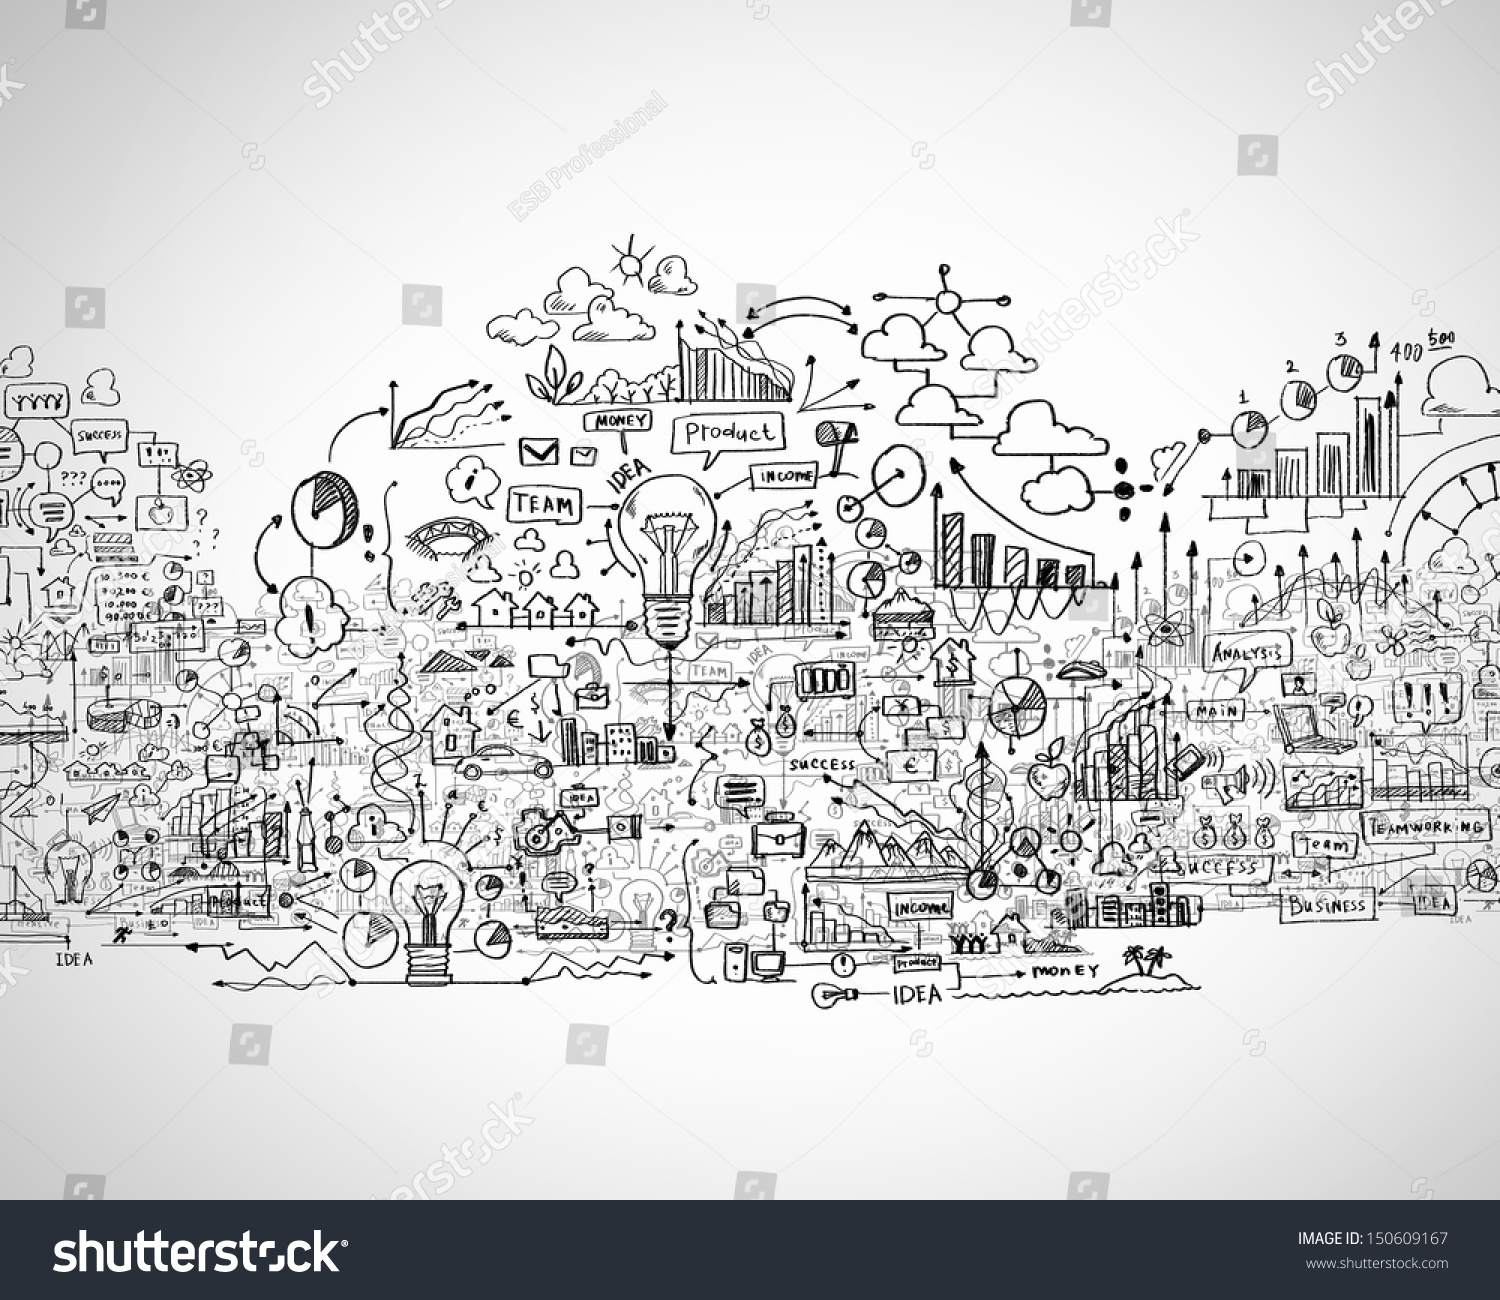 Hand drawn business ideas sketch against white background #150609167